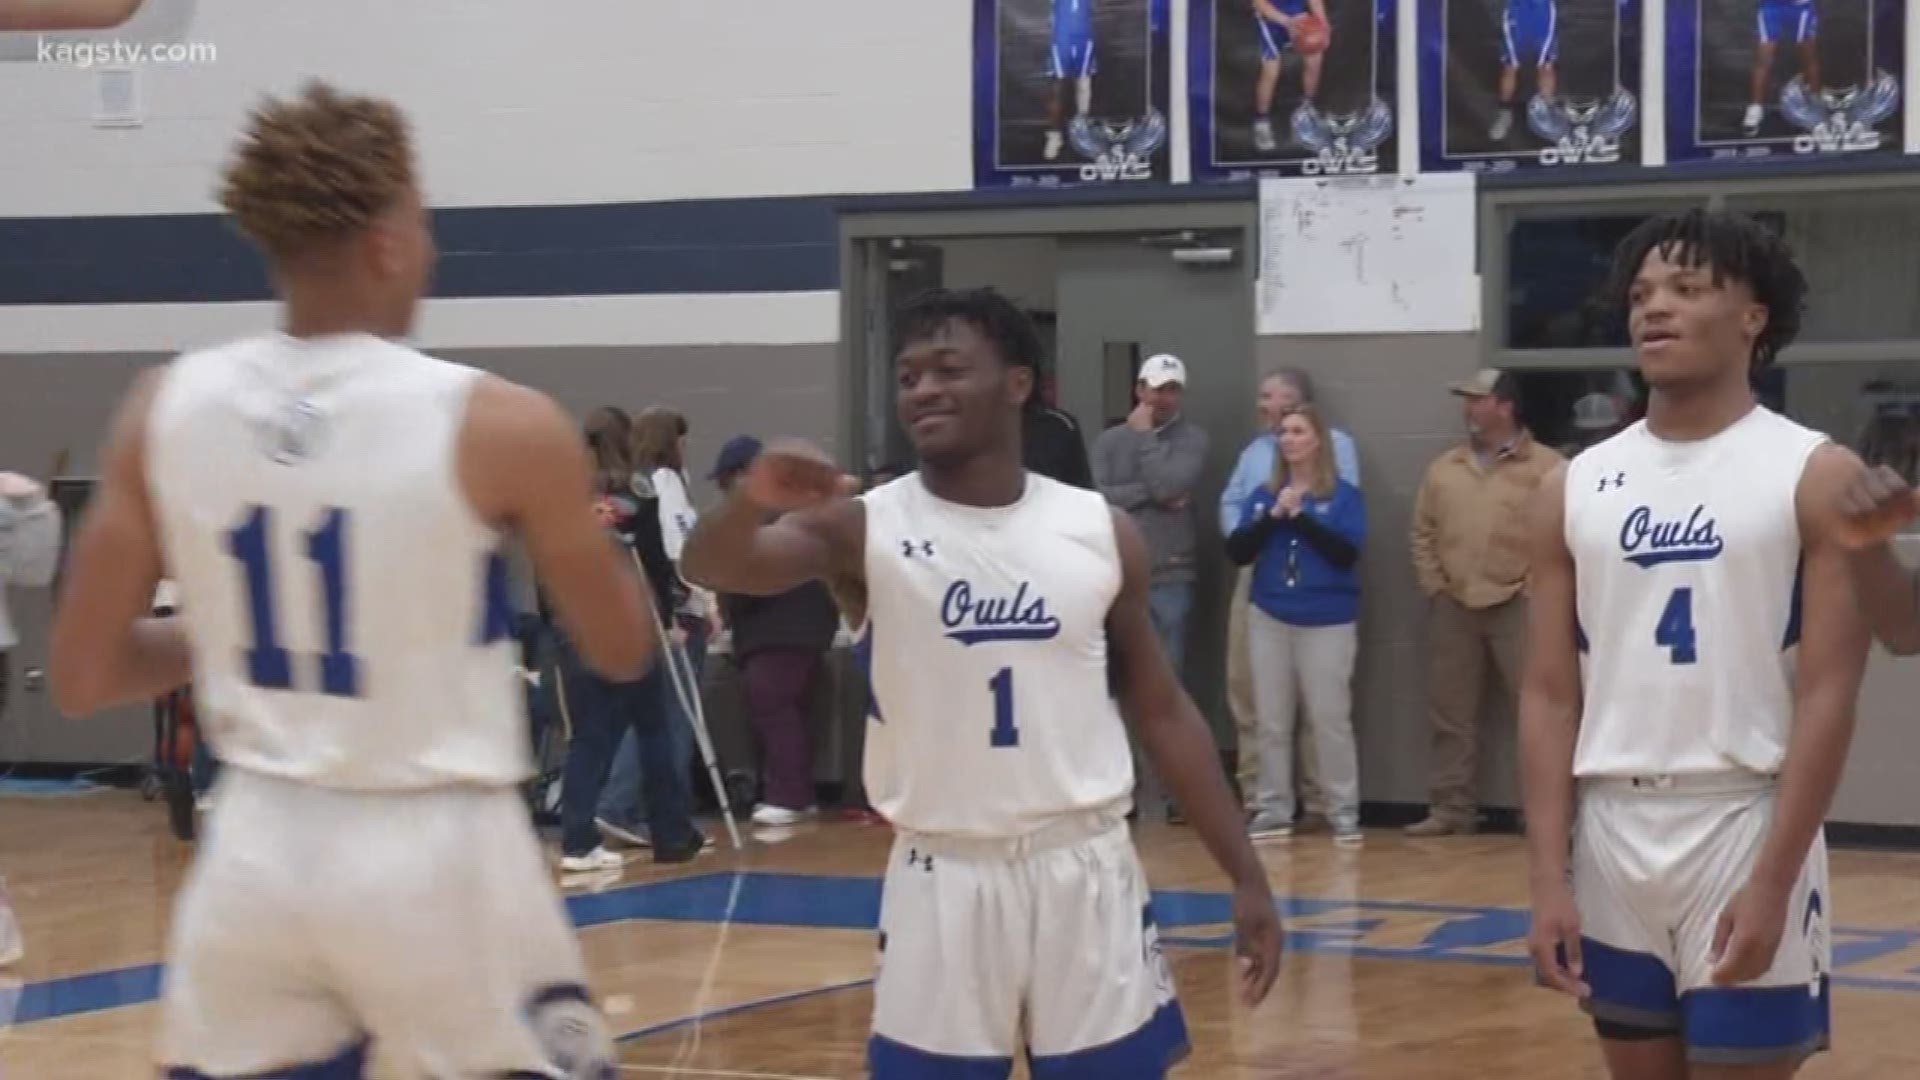 Check out the highlights and scores from around the Brazos Valley on Tuesday, January 21.